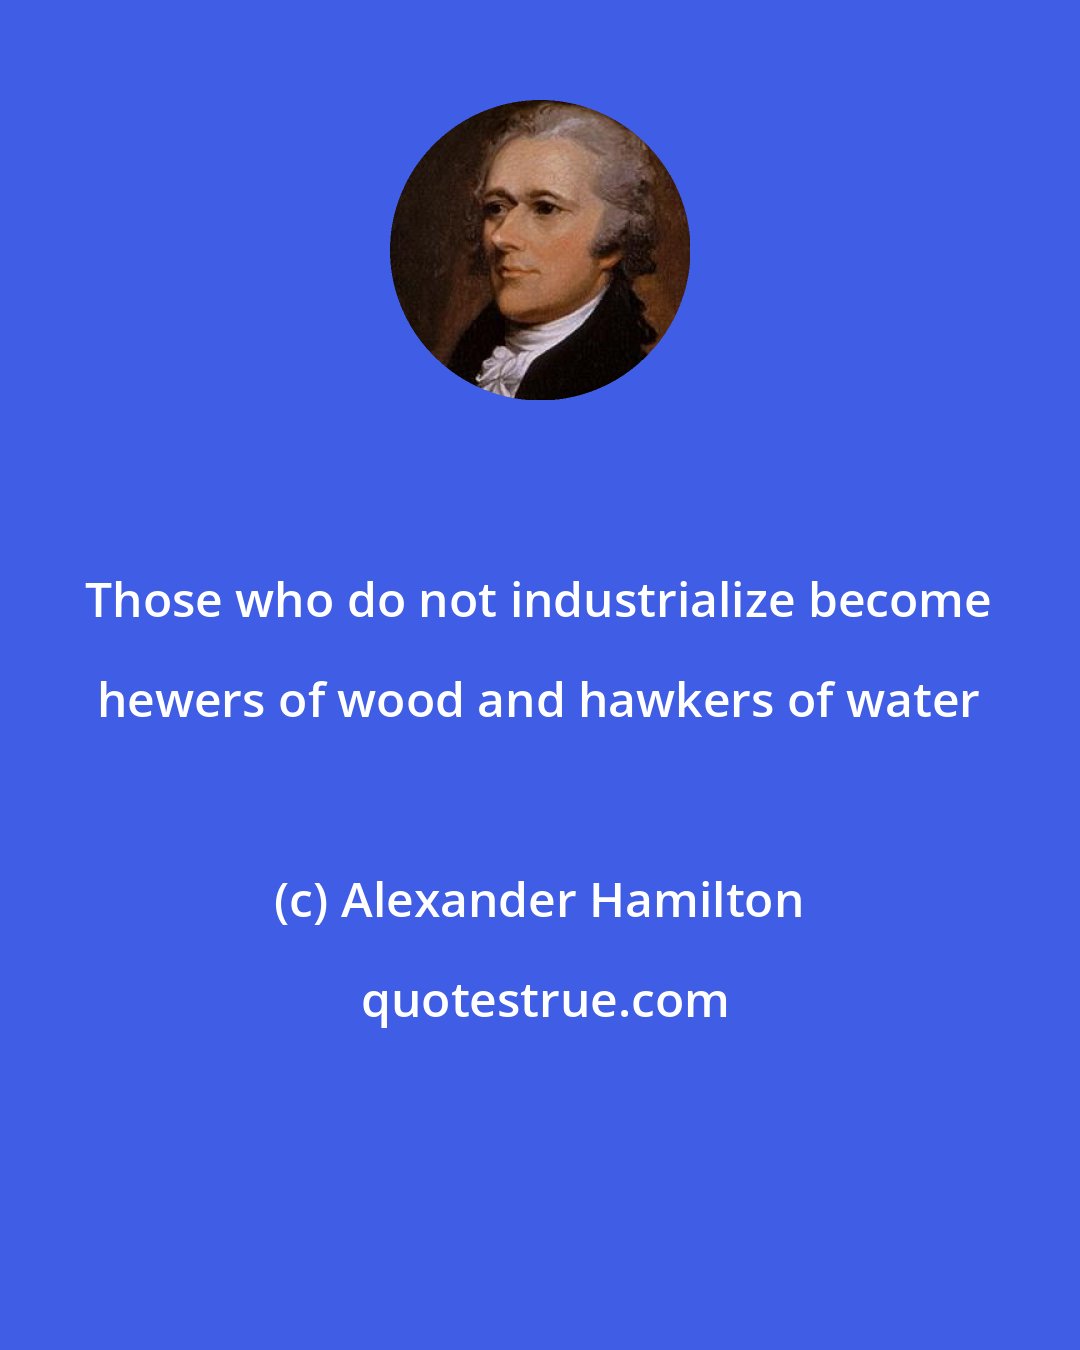 Alexander Hamilton: Those who do not industrialize become hewers of wood and hawkers of water